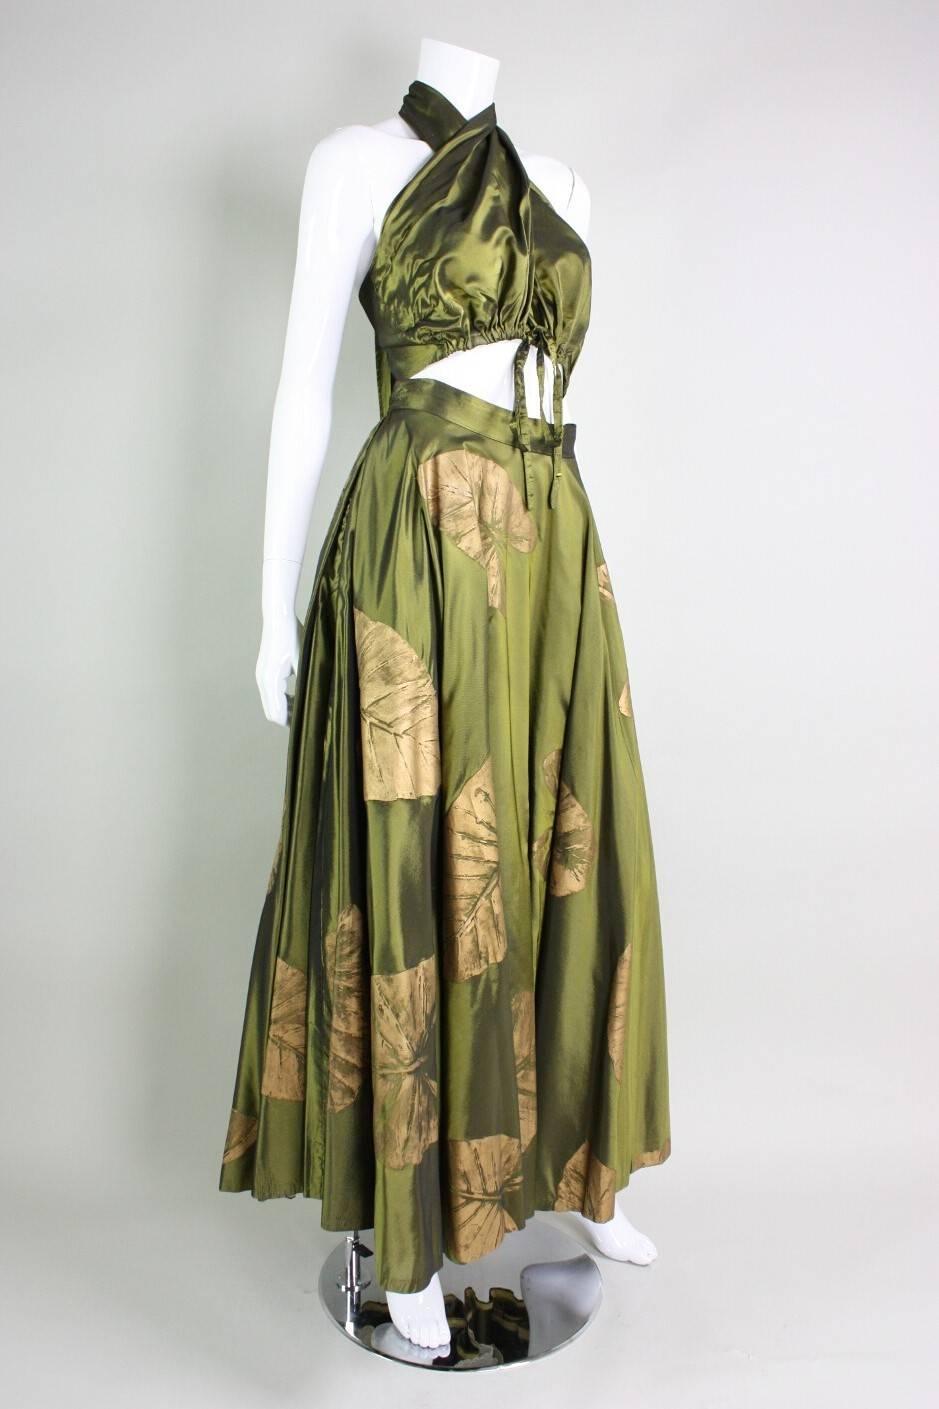 Vintage ensemble from Dorothy McNab dates to the 1950's and is made of olive green silk. Wrap-style bodice ties at waist with a drawstring and wraps around neck and ties at center back neck.  Full skirt features a leaf print that has been